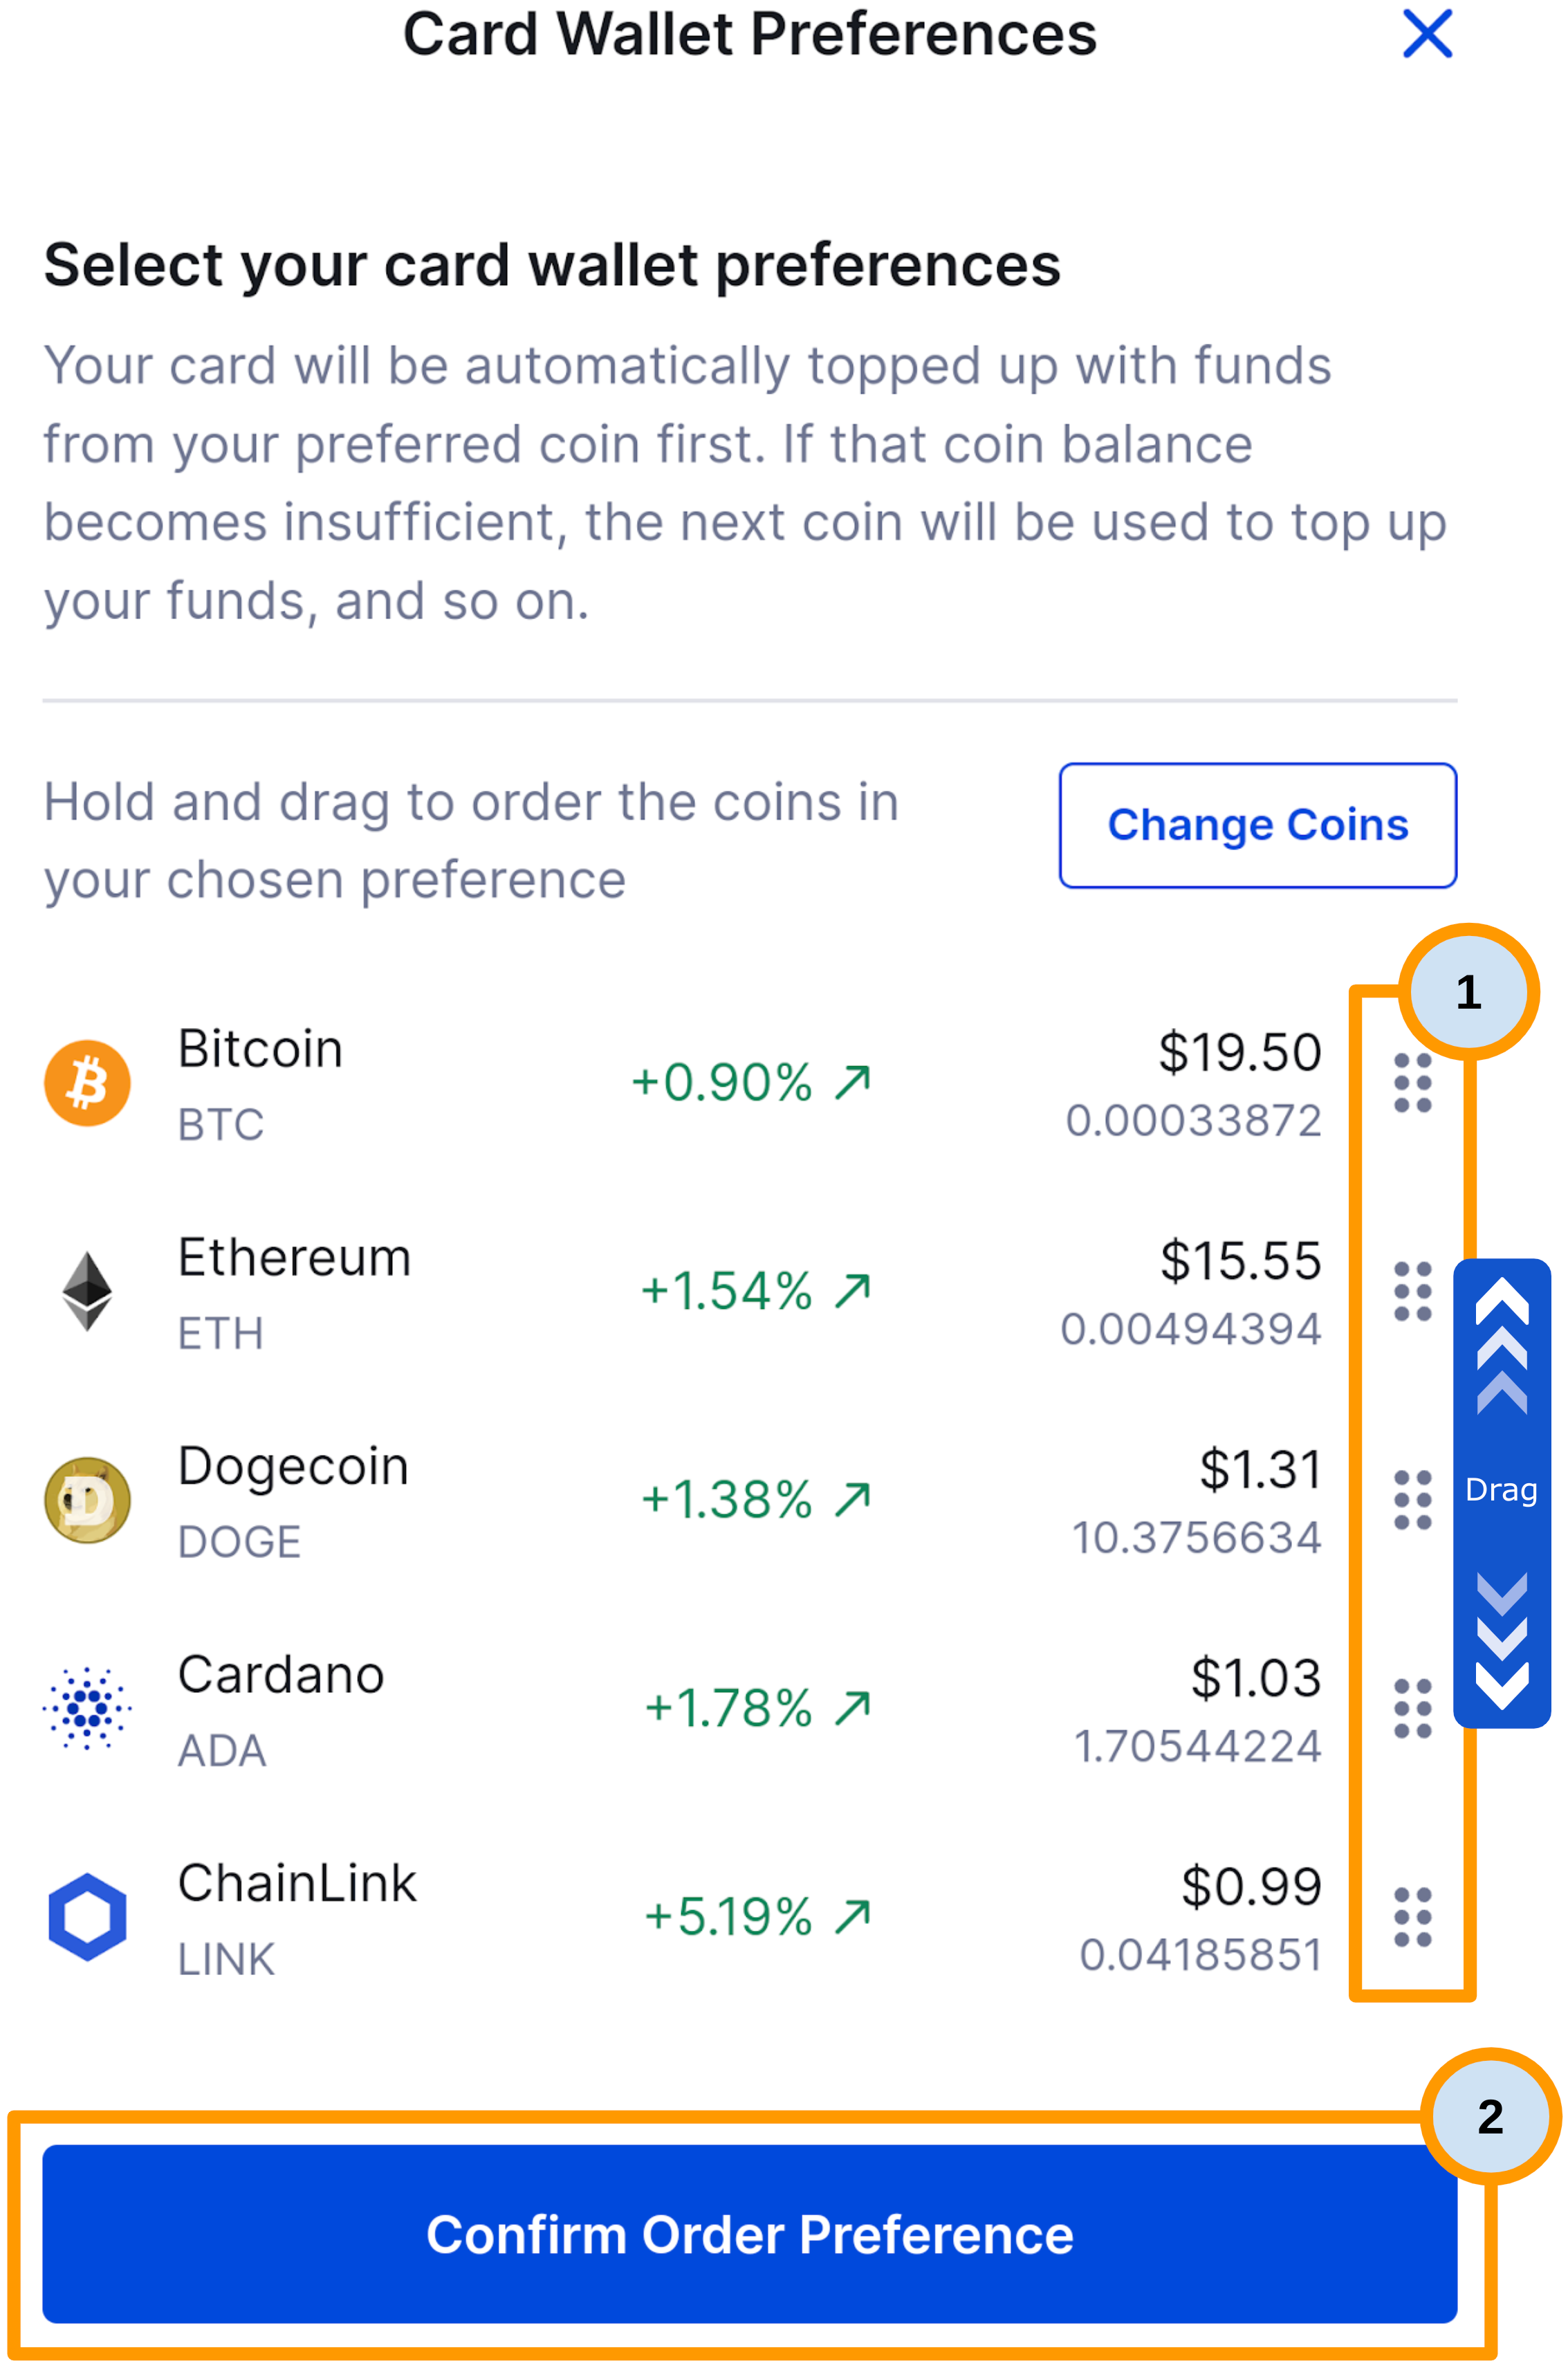 CoinSpot Mastercard - Get Started Guide - Figure 5.png